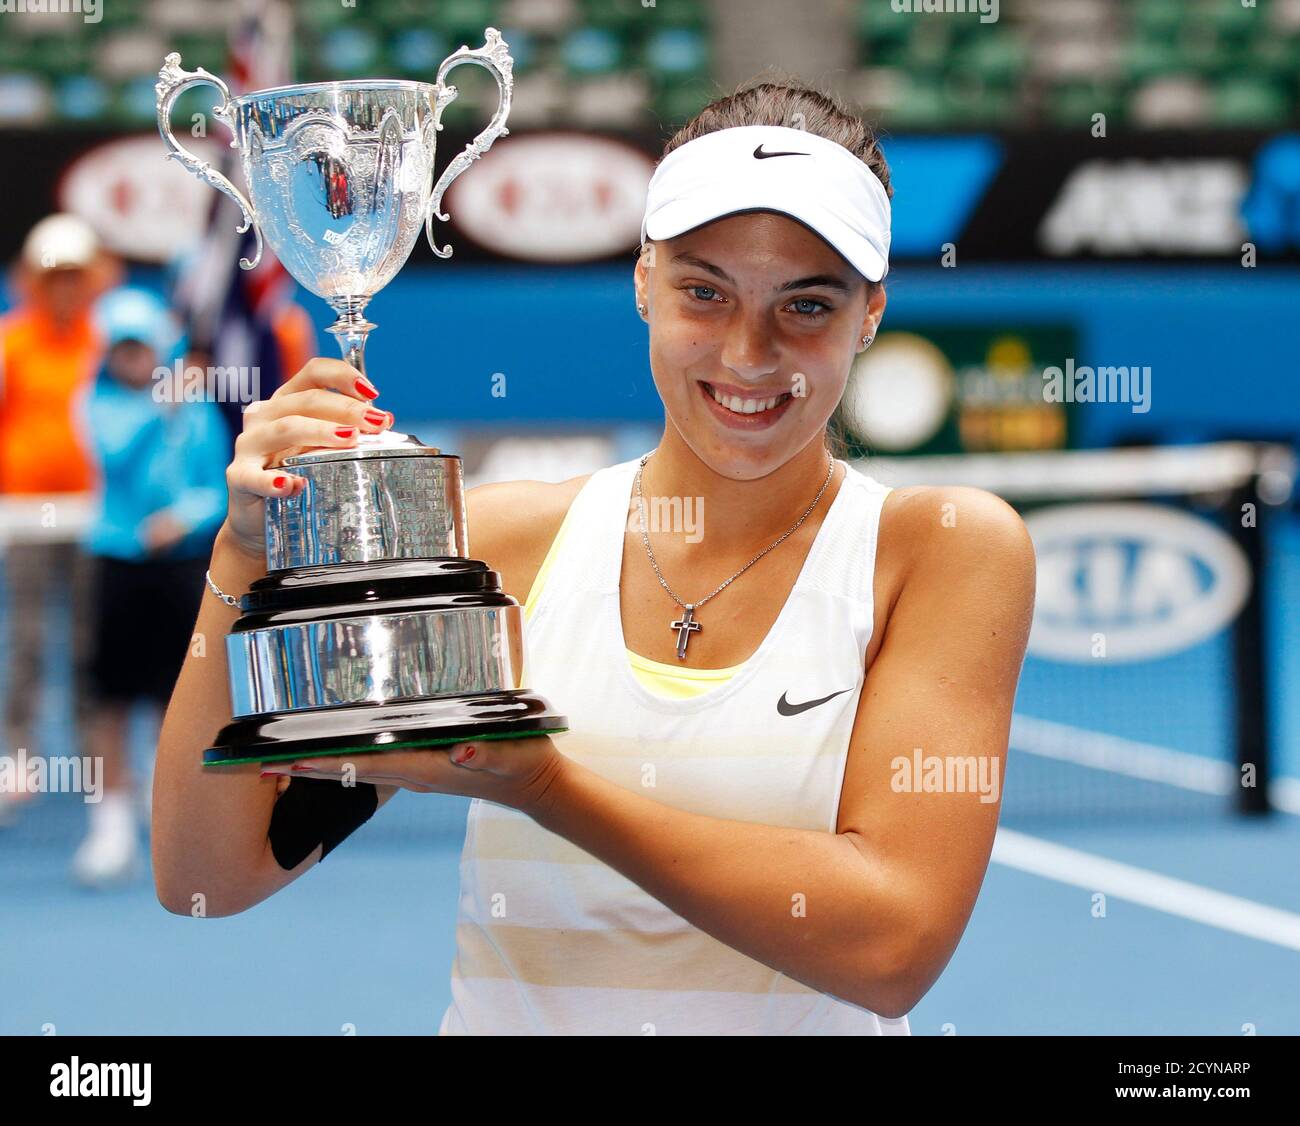 skøn til stede hinanden Ana Konjuh of Croatia poses with the trophy after winning the junior girls'  singles final match against Katerina Siniakova of Czech Republic at the Australian  Open tennis tournament in Melbourne January 26,